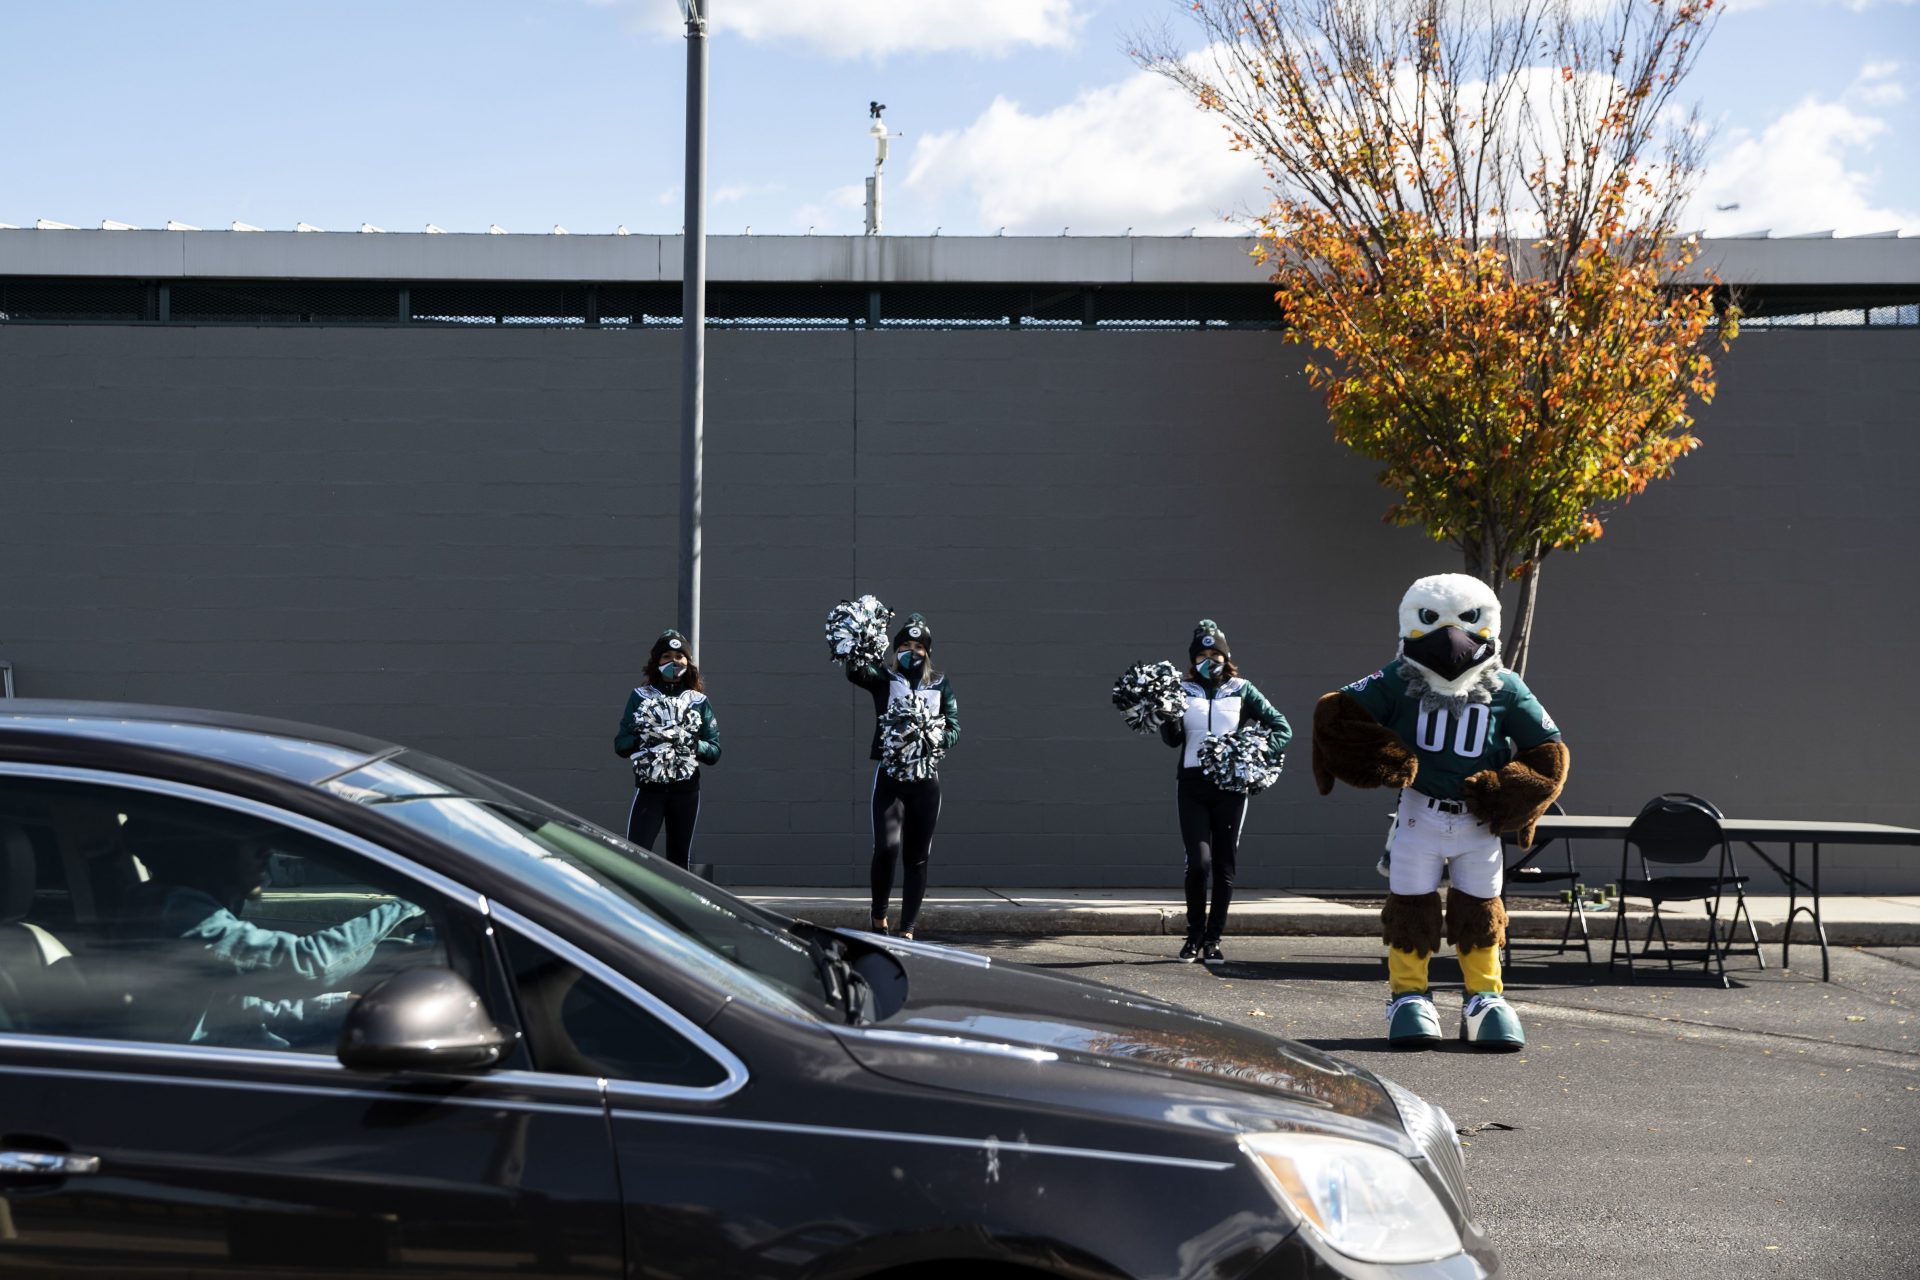 The Eagles mascot, Swoop, and team cheerleaders greeted voters dropping off their mail ballots at a satellite election office site at Lincoln Financial Field in Philadelphia on Nov. 2, 2020.